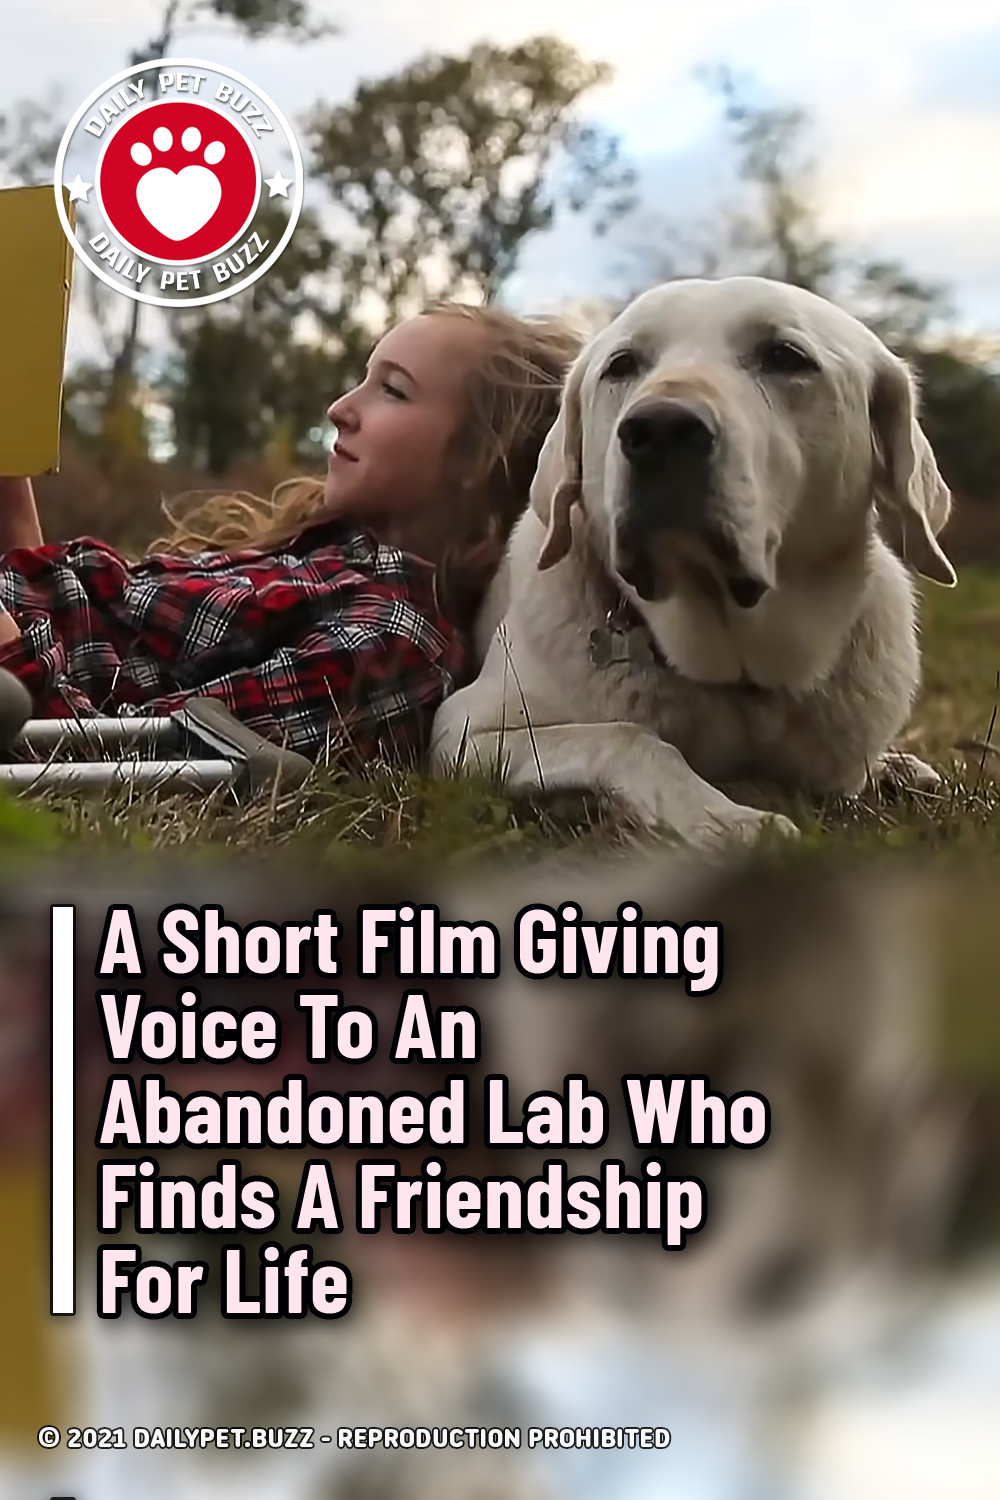 A Short Film Giving Voice To An Abandoned Lab Who Finds A Friendship For Life